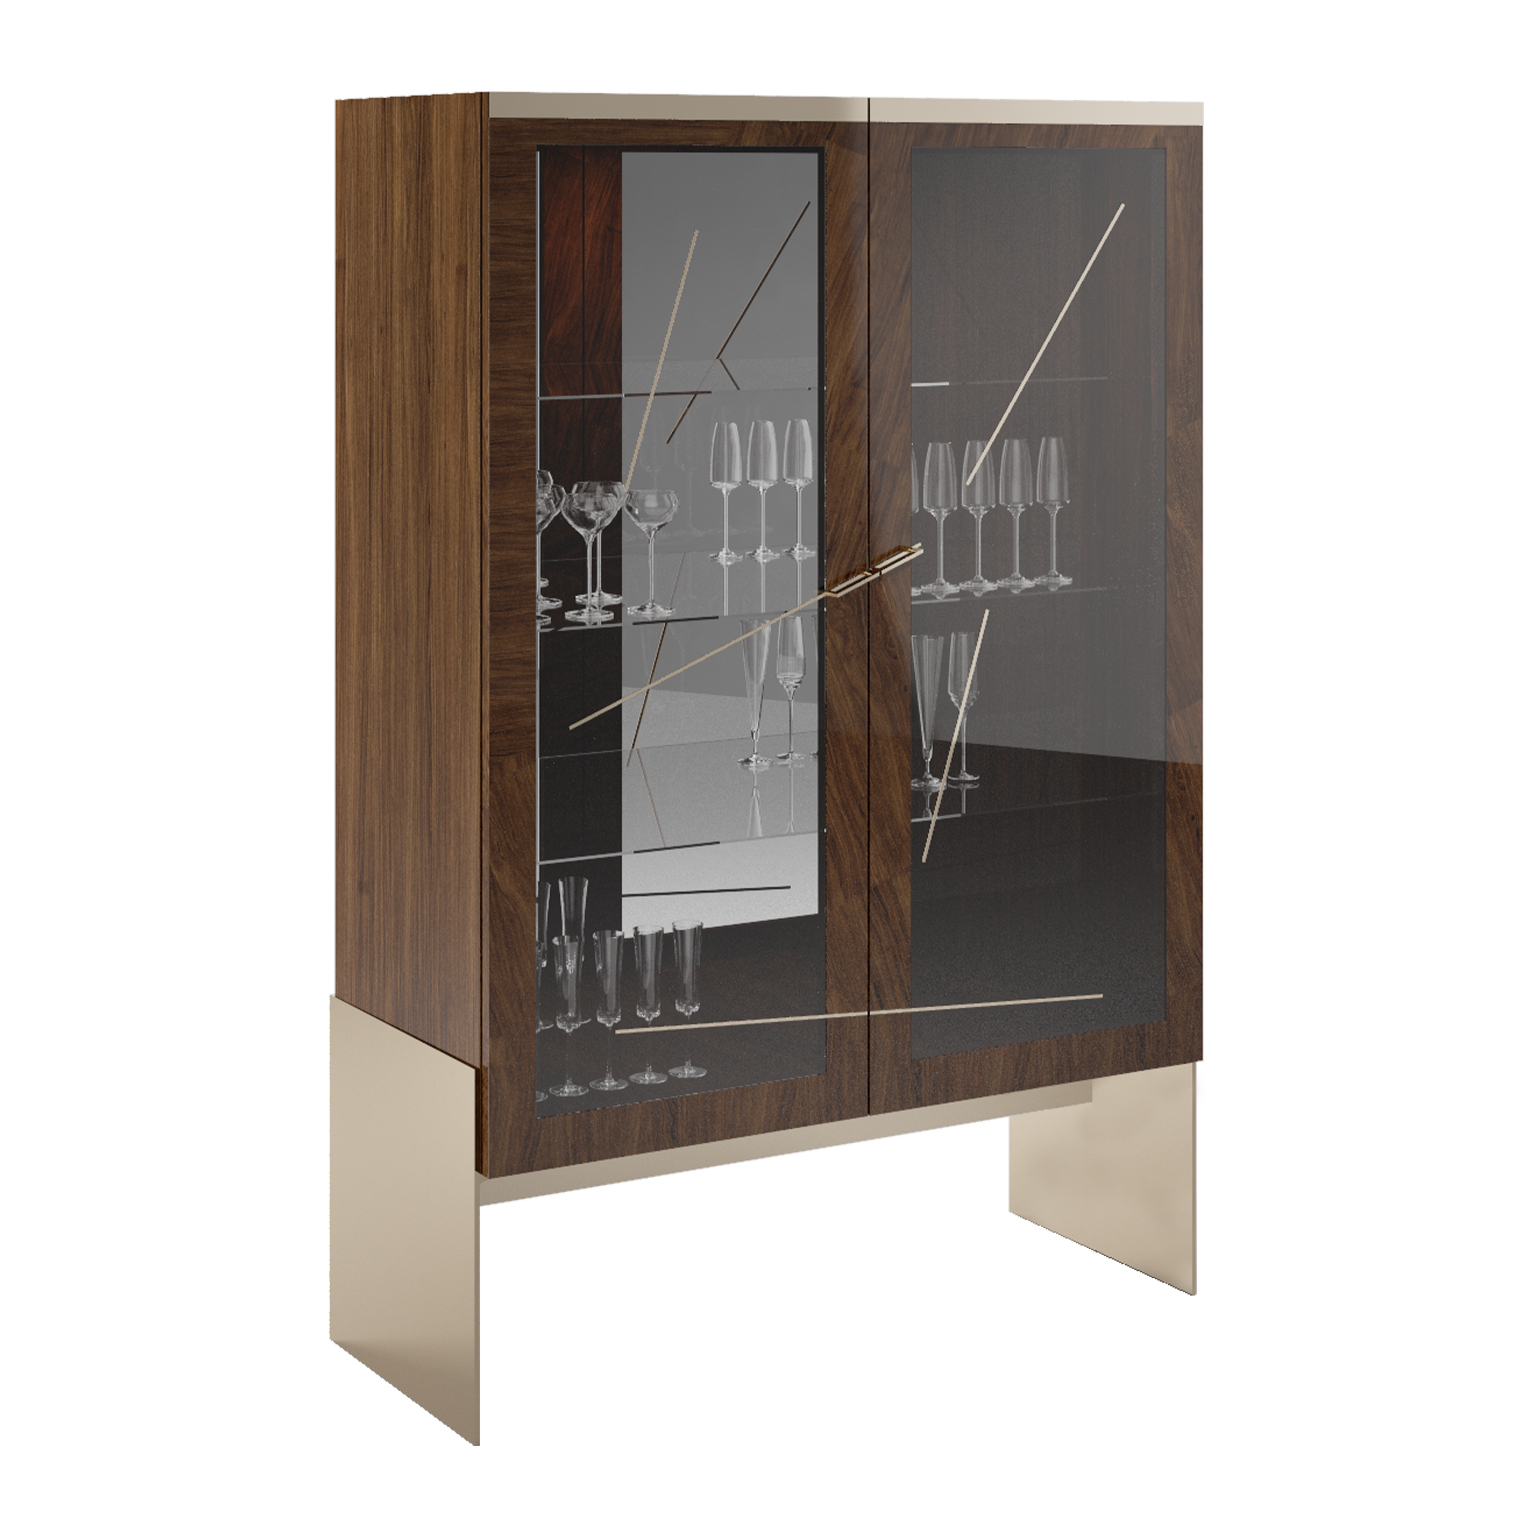 Tall cabinet with walnut wood body with high gloss finish, glass doors and smoked brass details.